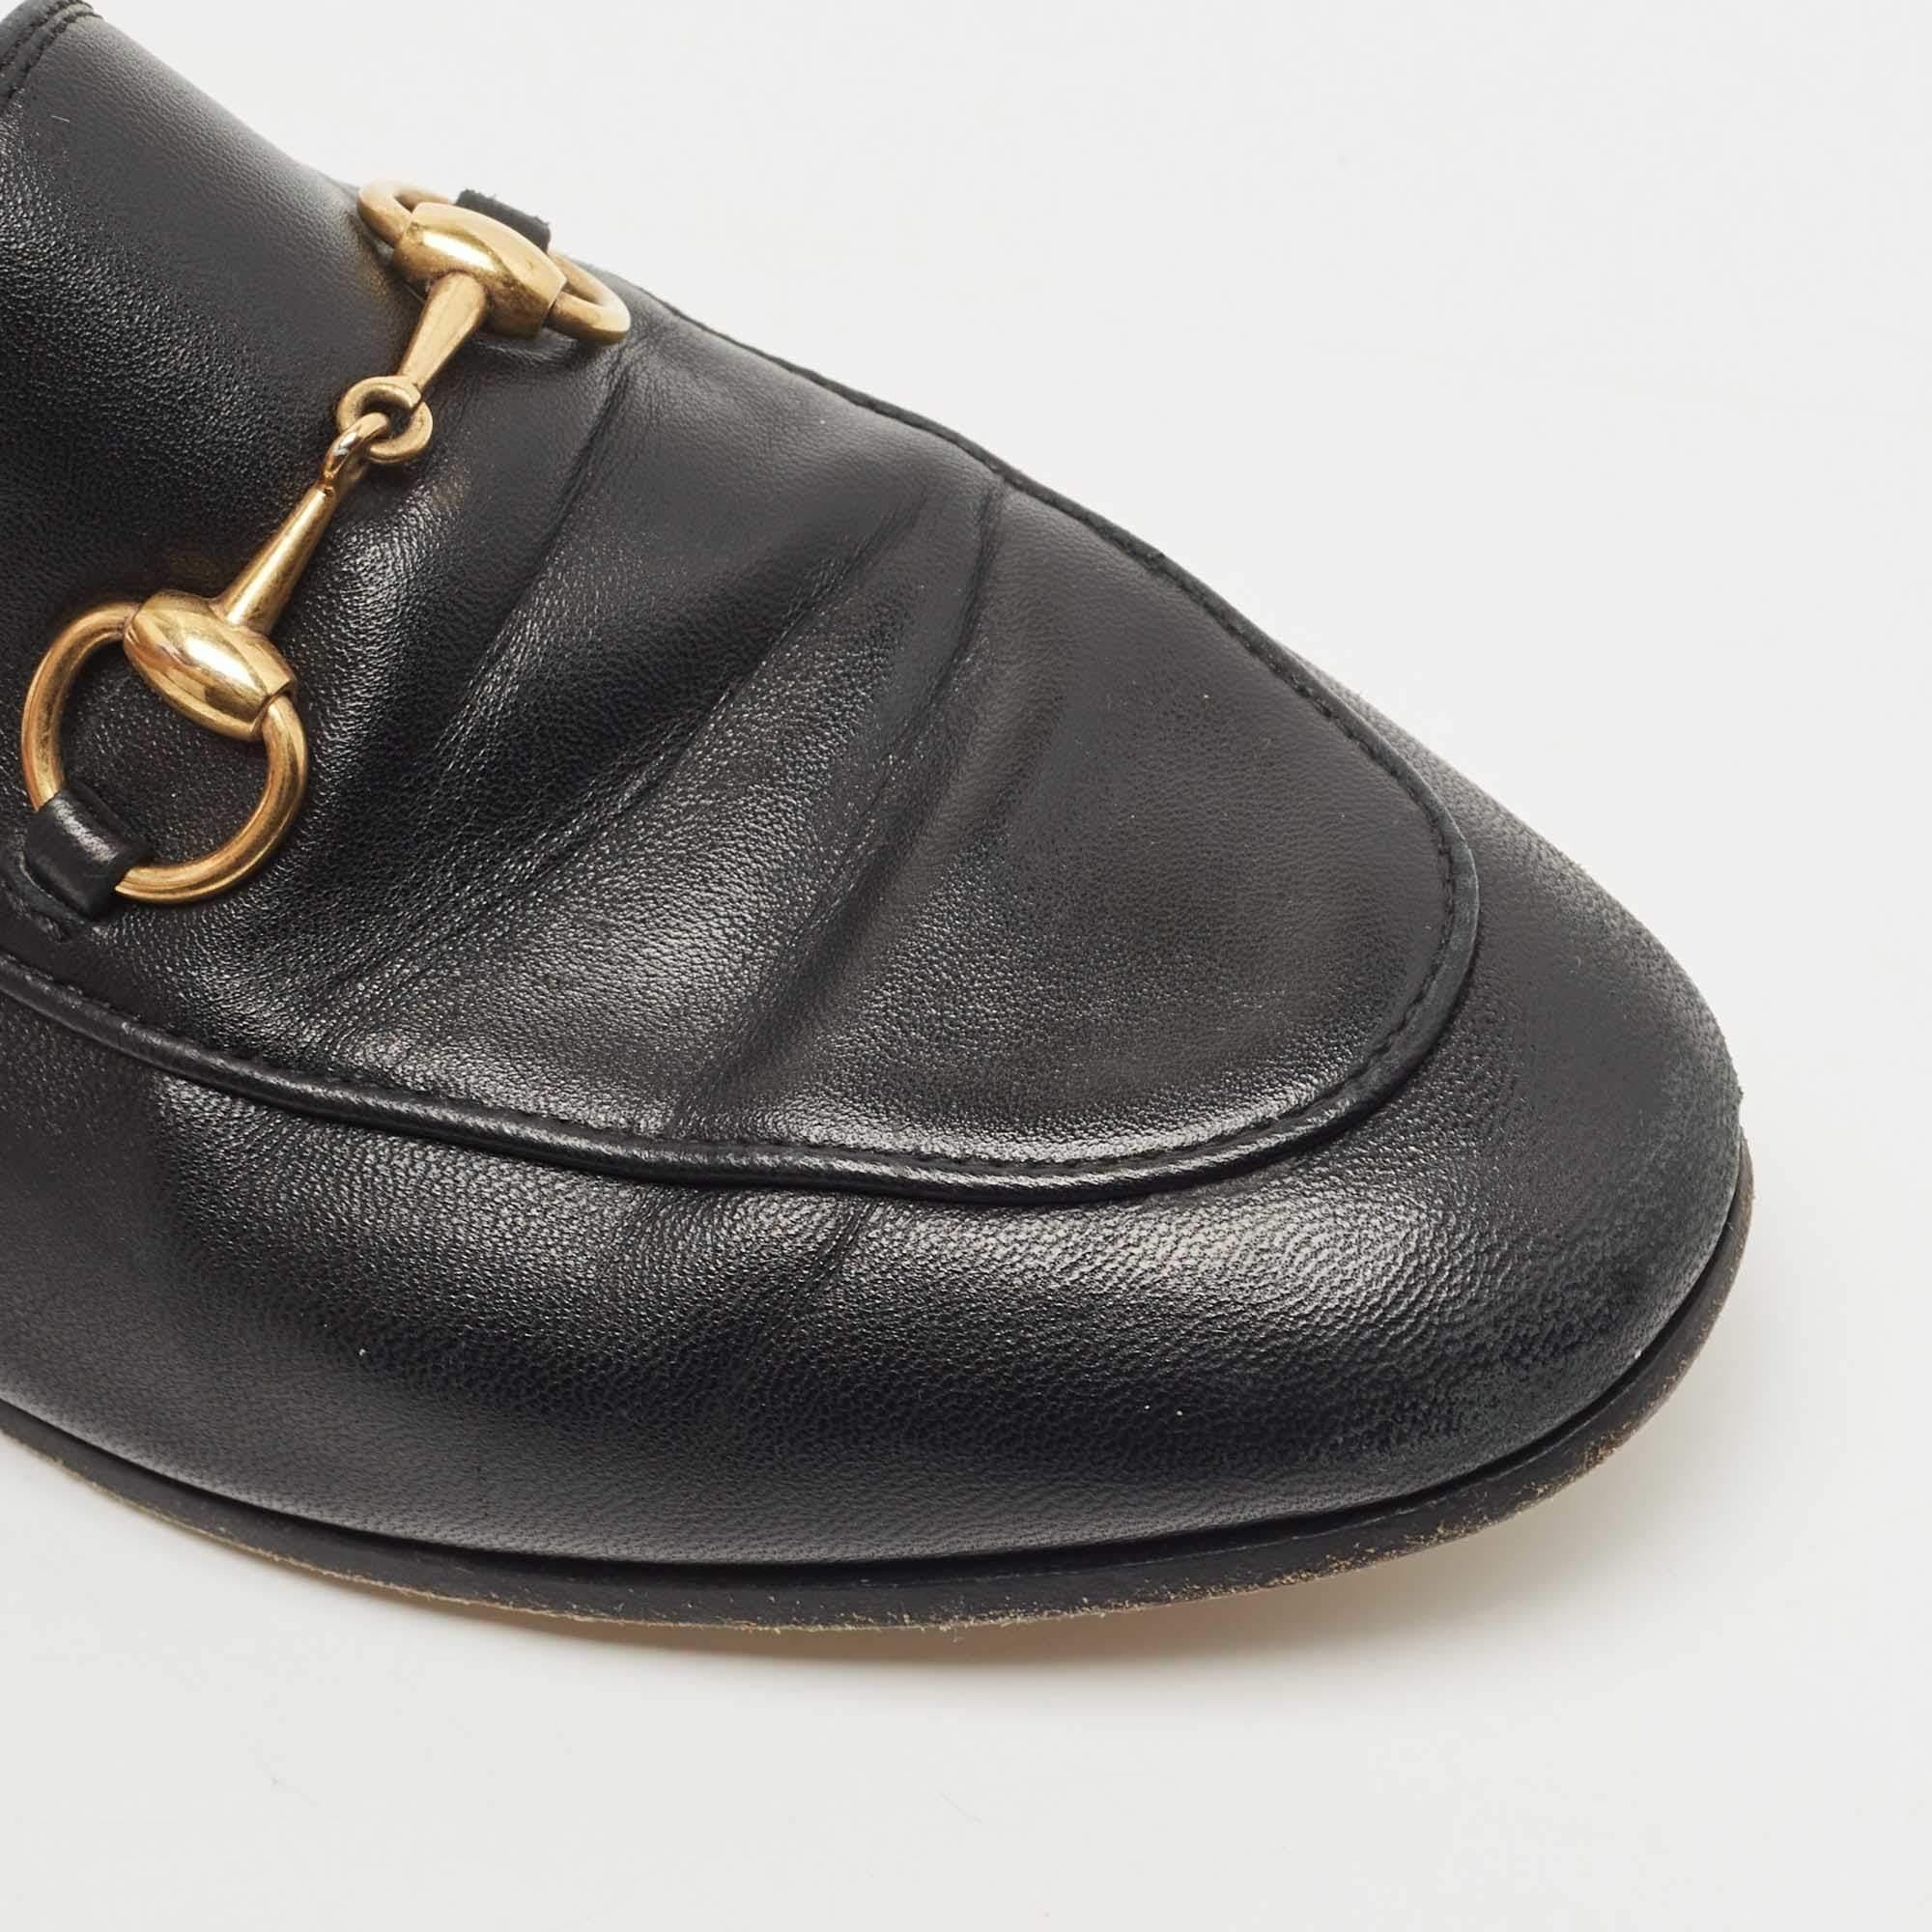 Gucci Black Leather Jordaan Loafers Size 35 2